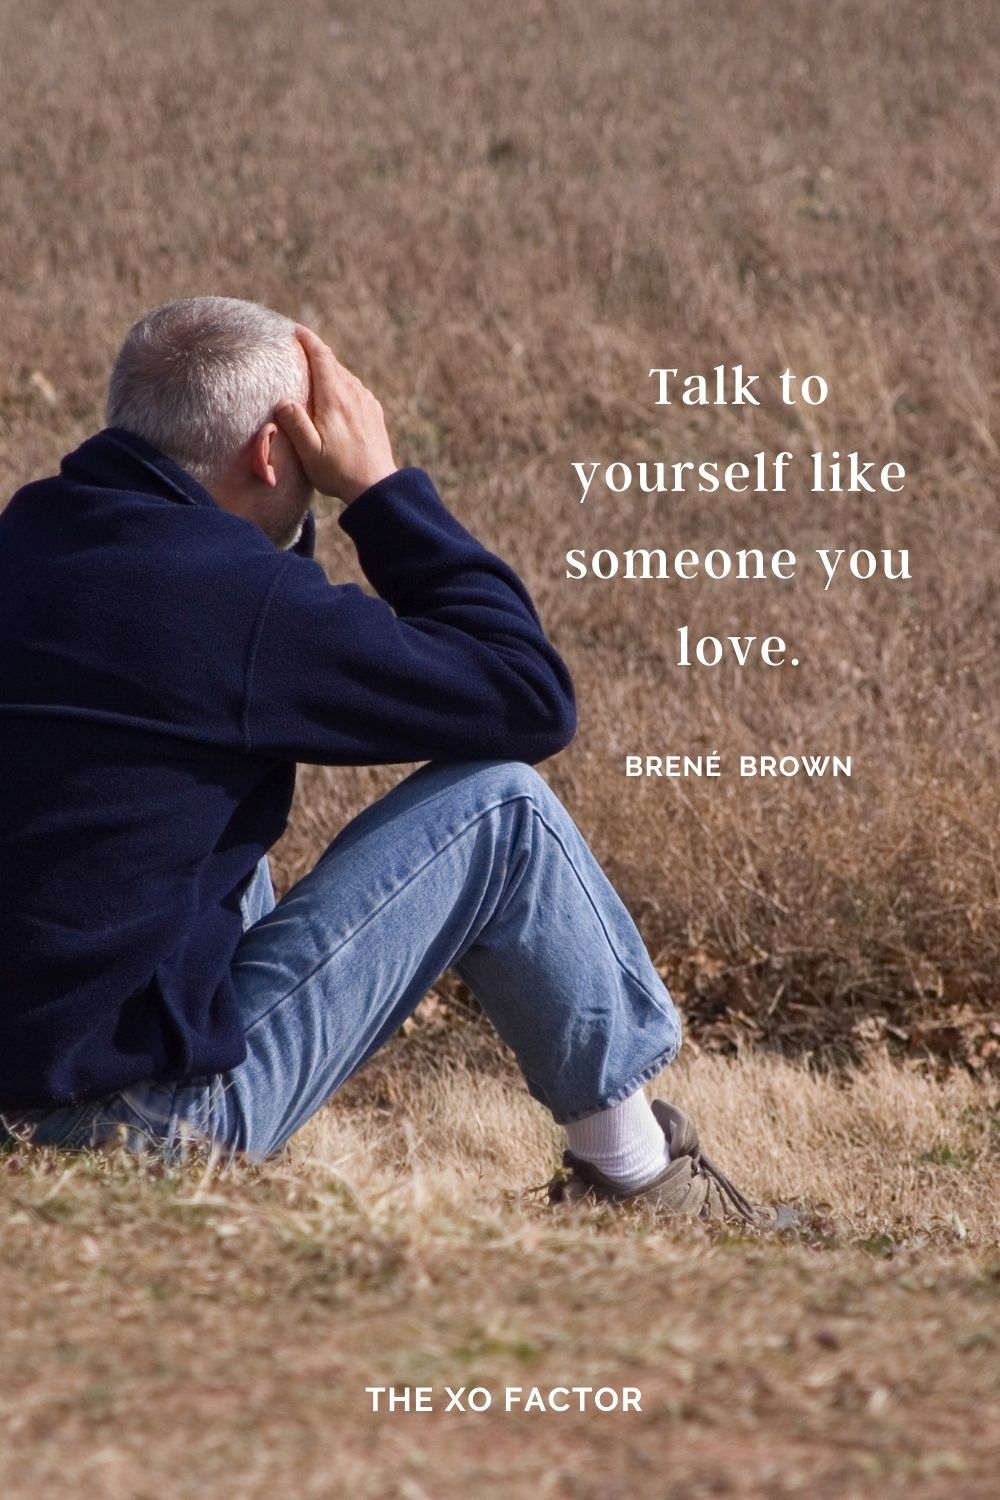 Talk to yourself like someone you love. Brené Brown